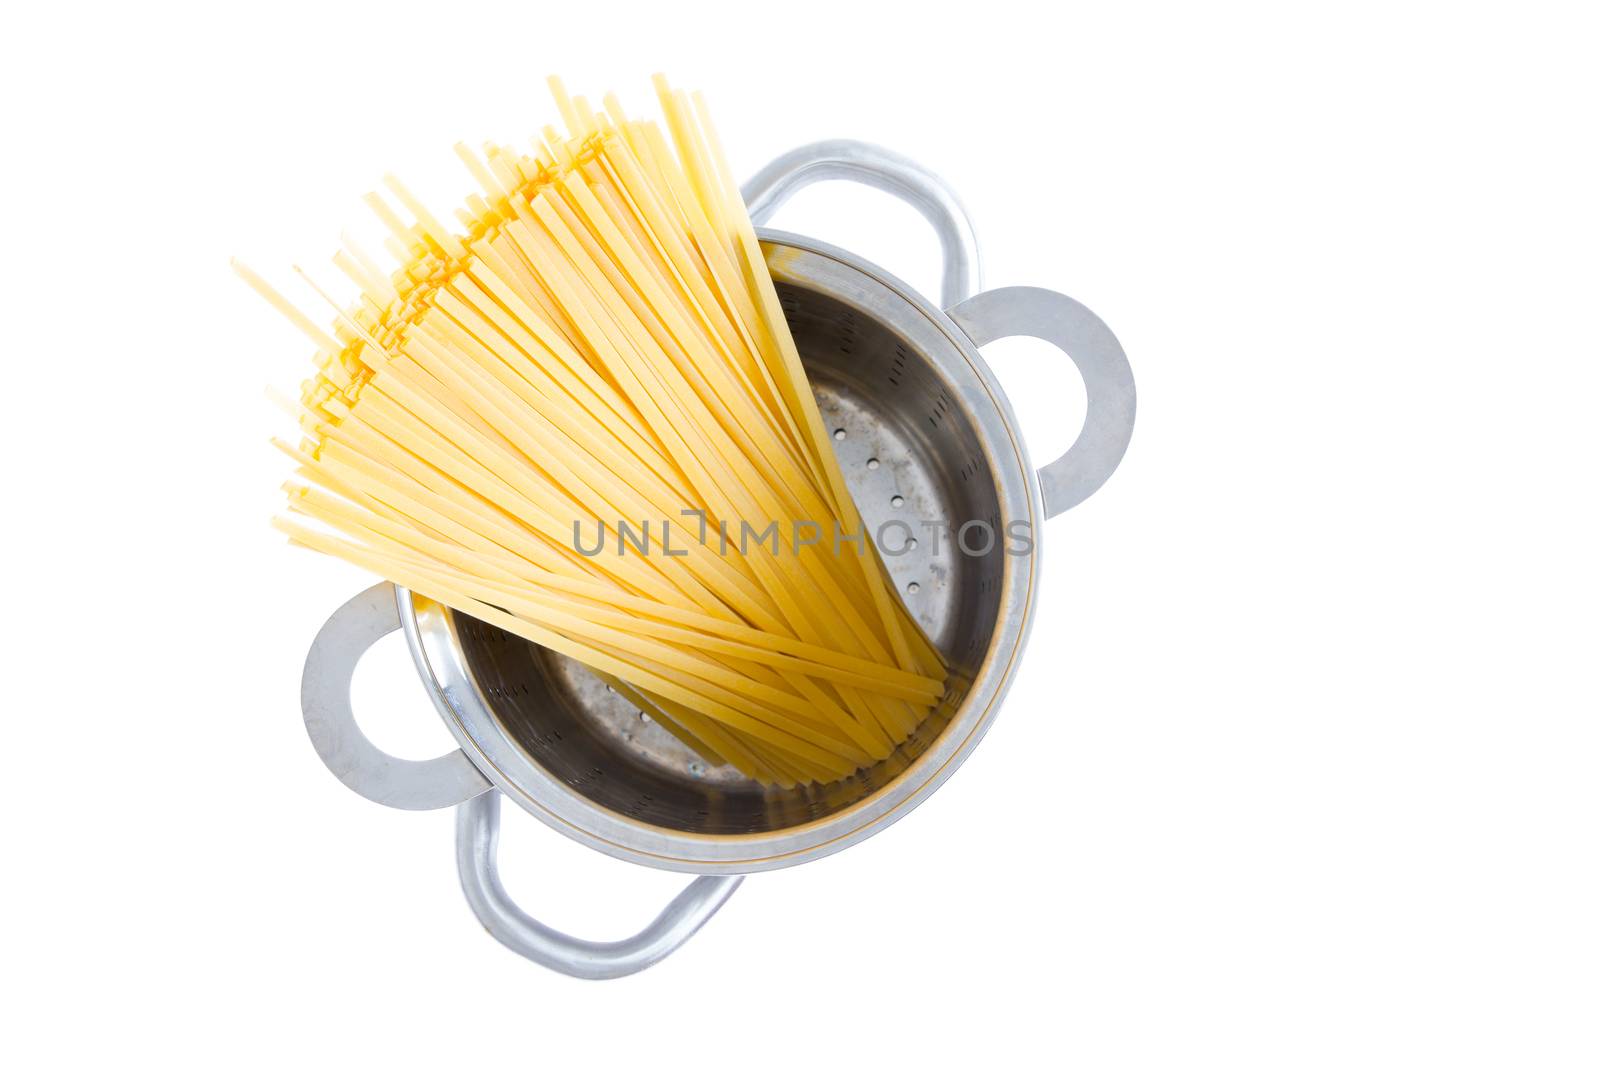 Overhead view of a bundle of dried fettuccine pasta standing upright in a pot ready for boiling for an Italian pasta recipe, isolated on white